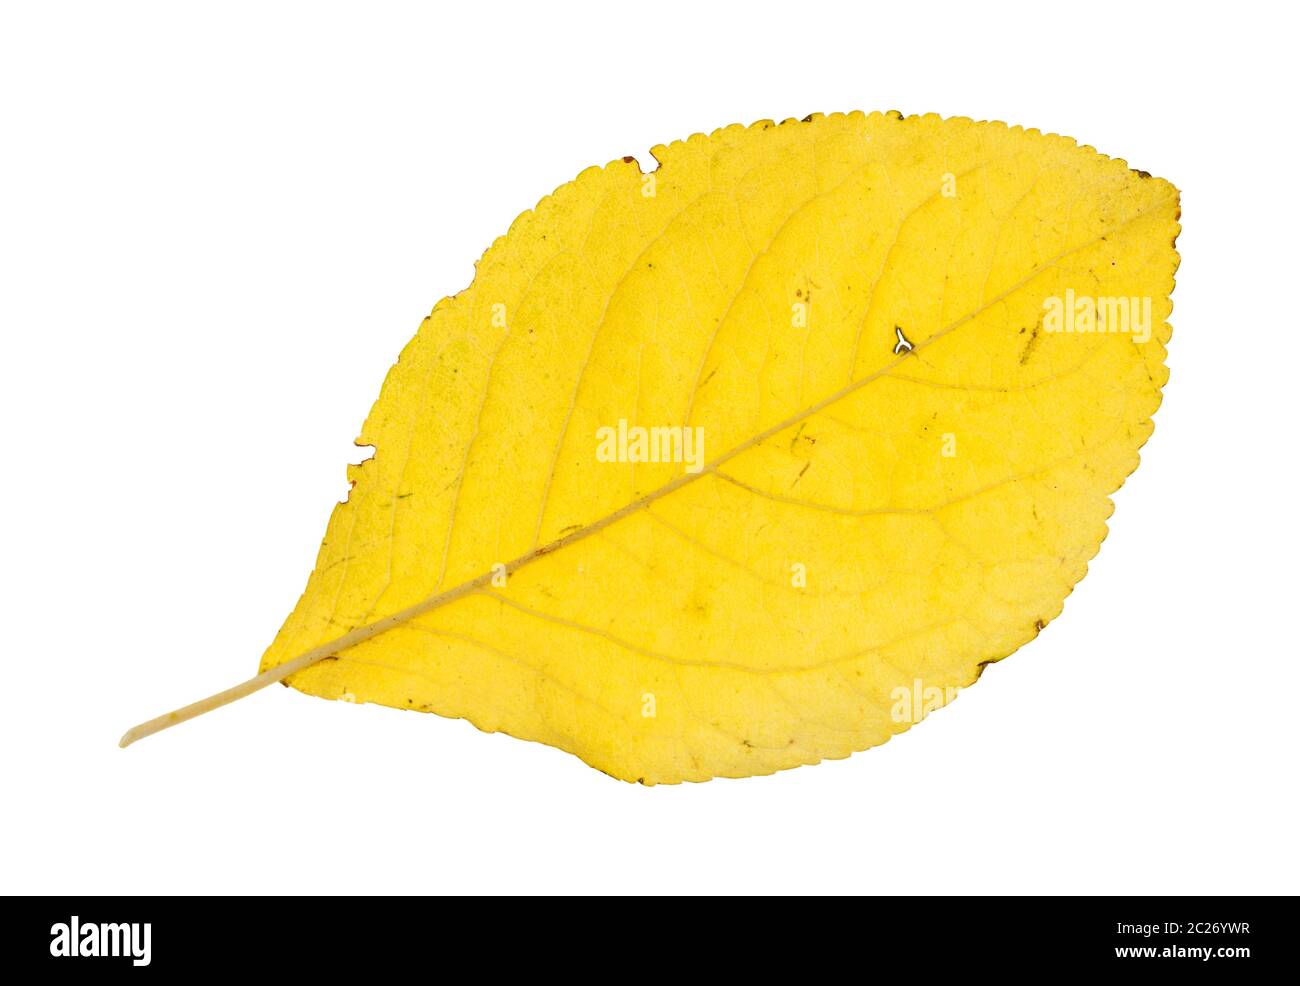 back side of fallen yellow leaf of plum tree isolated on white background Stock Photo